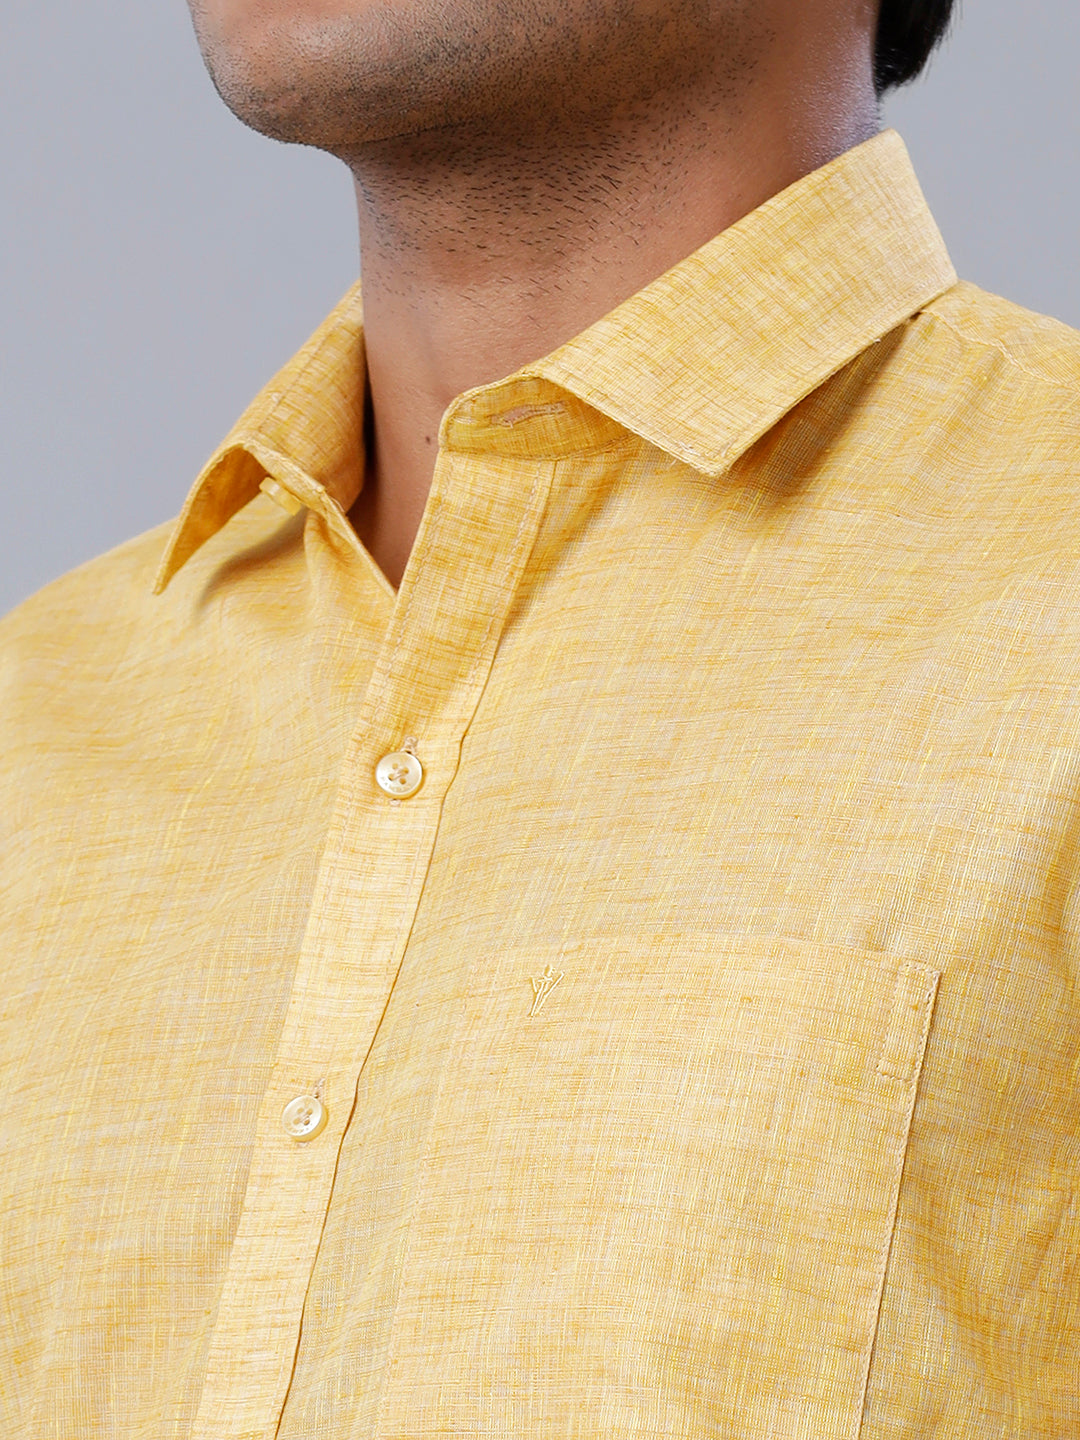 Mens Formal Shirt Full Sleeves Yellow T39 TO2-Zoom view